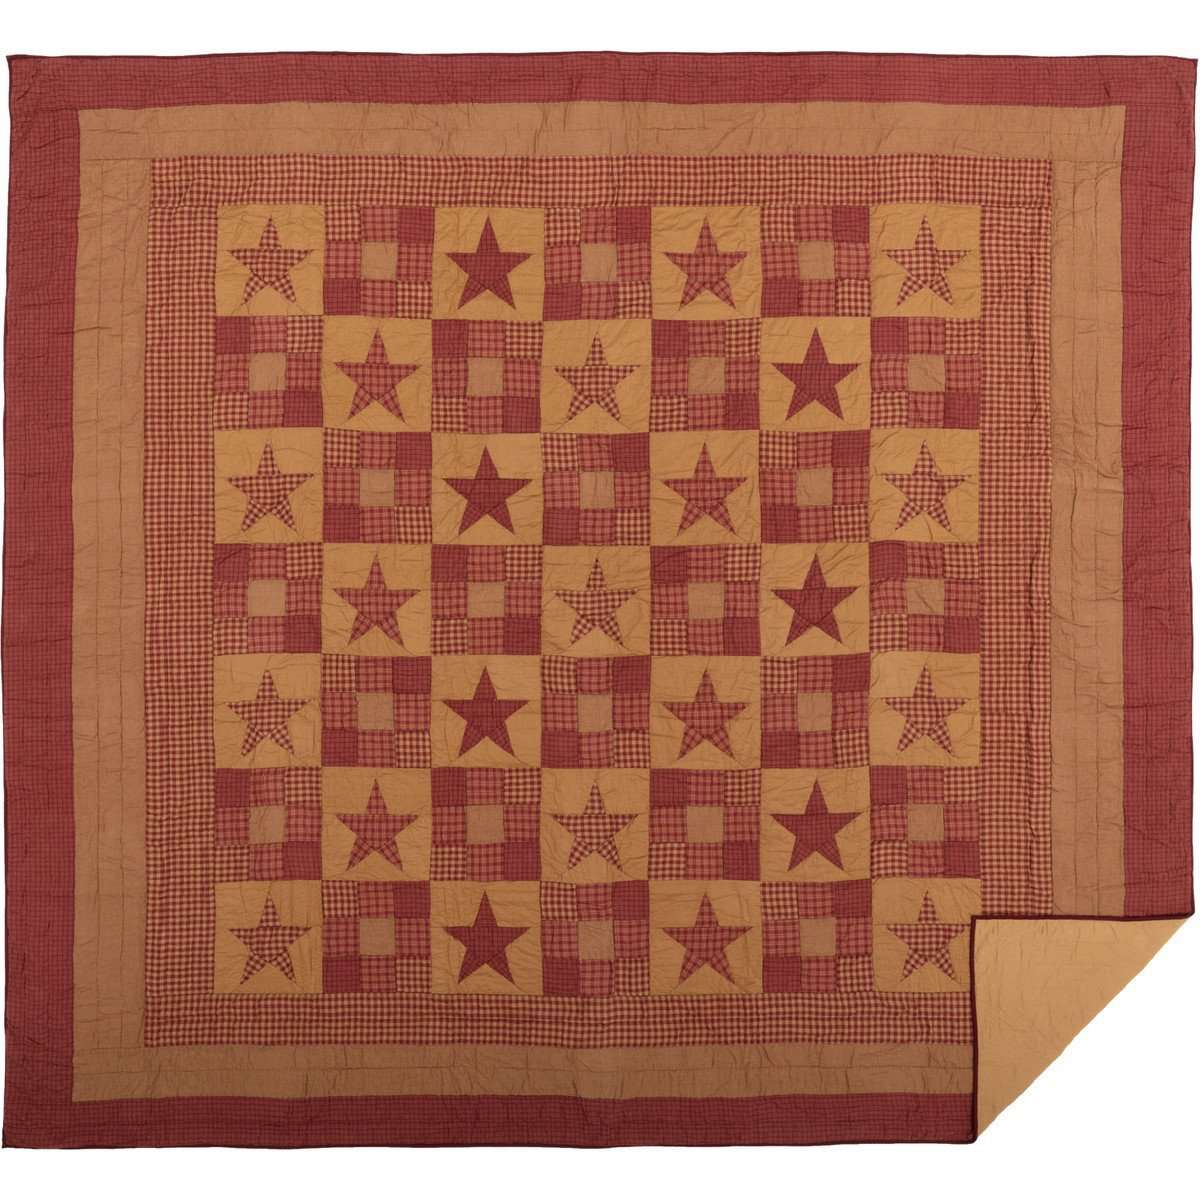 Ninepatch Star California King Quilt 130Wx115L VHC Brands full